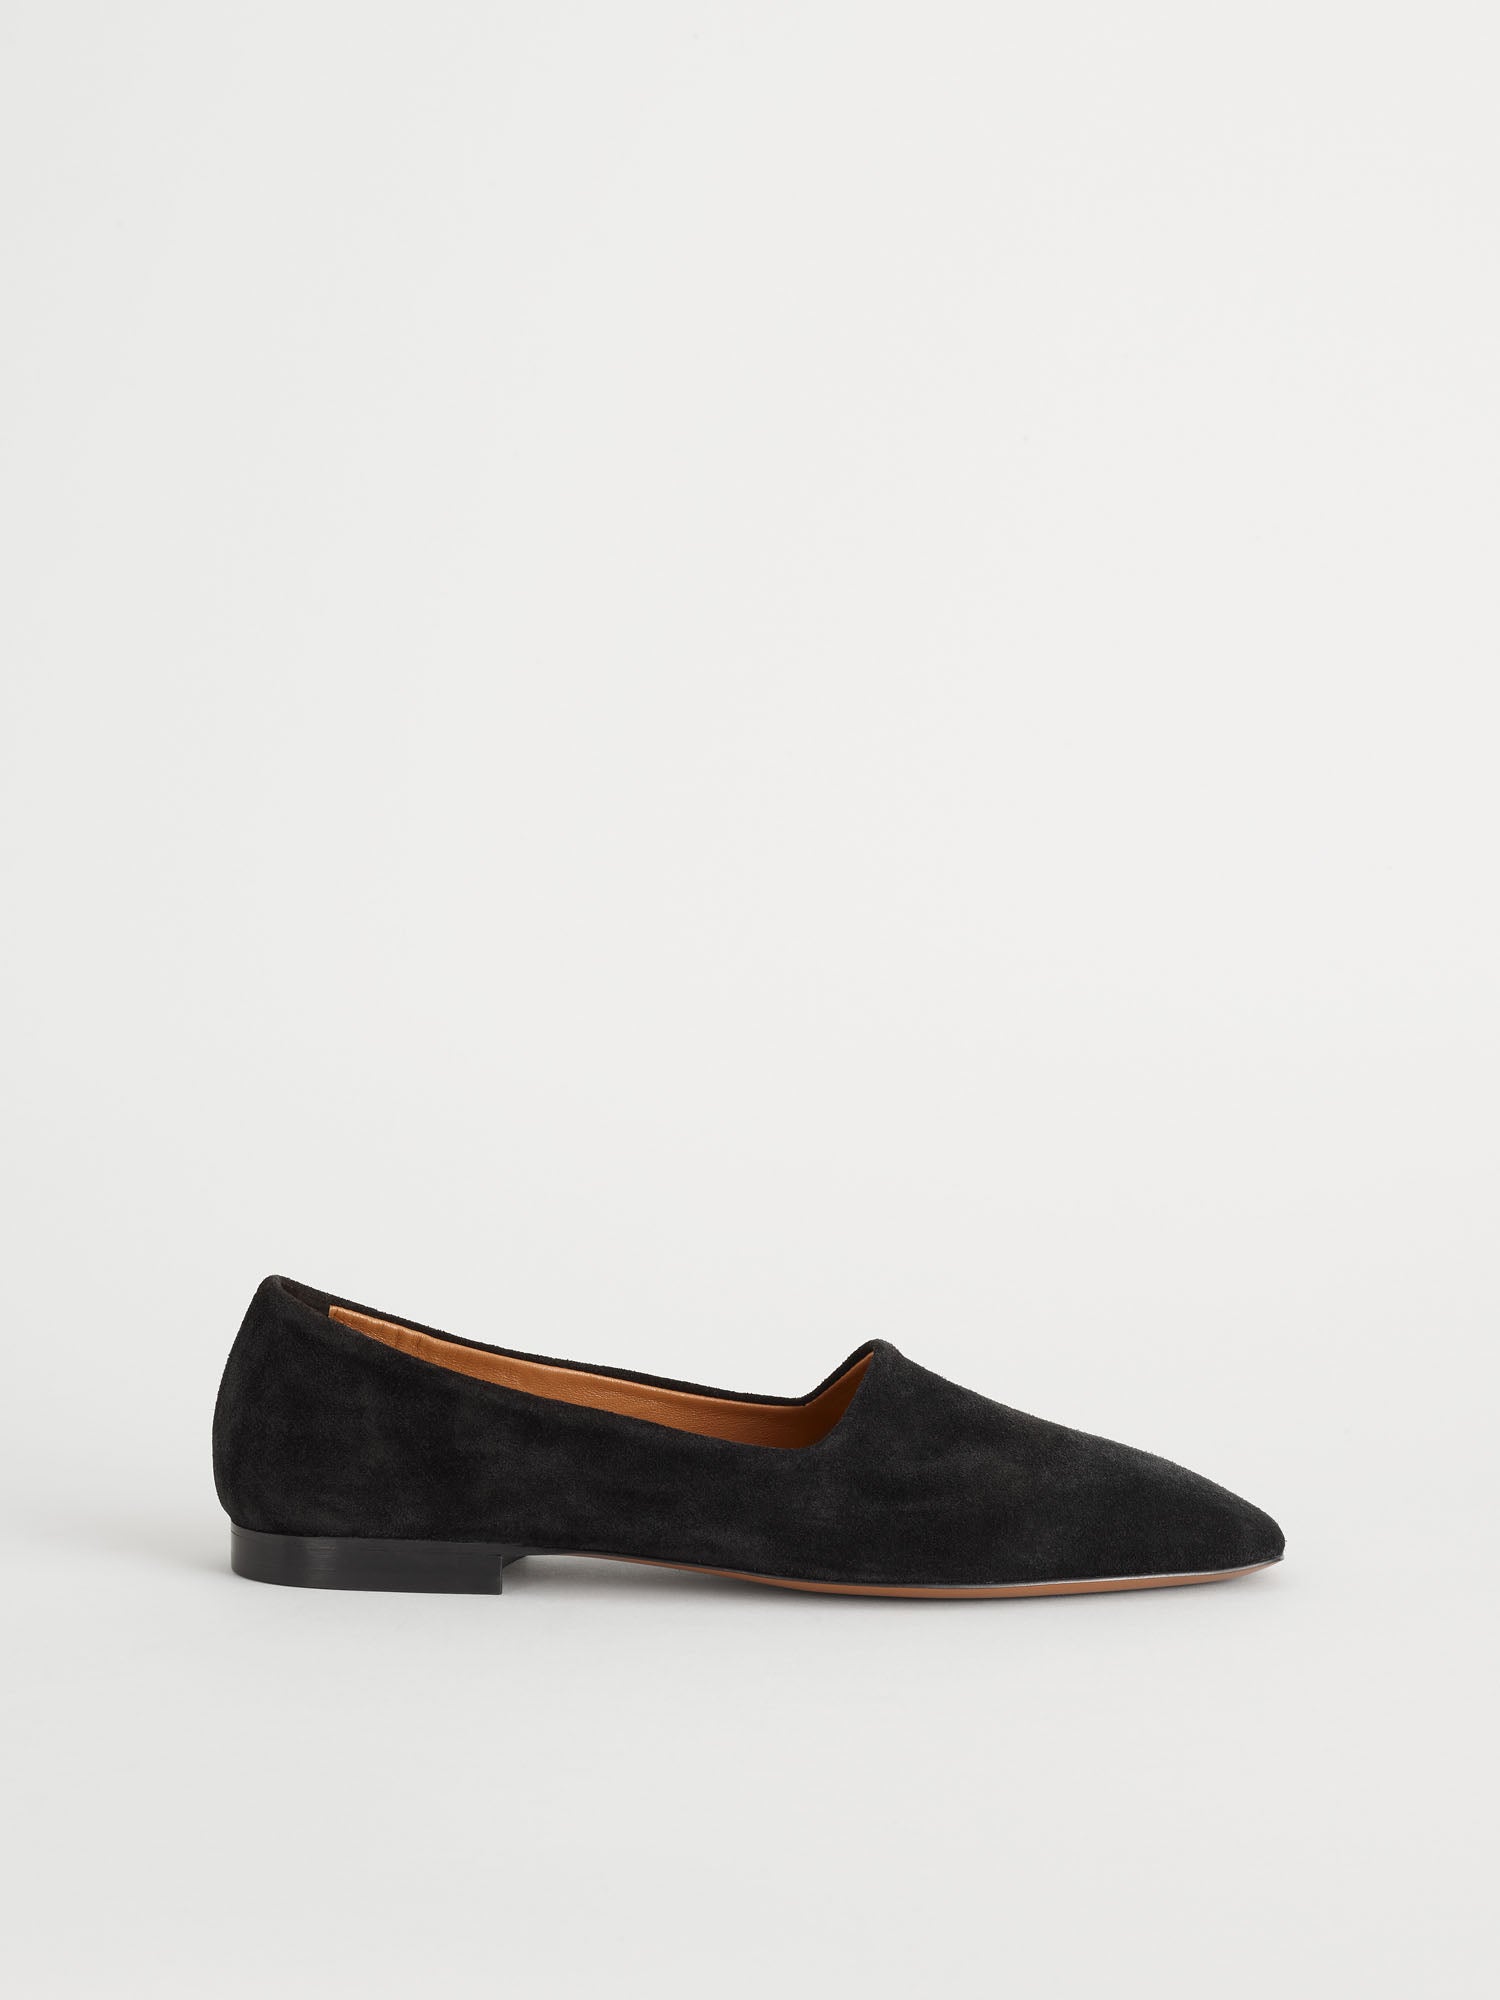 Andrano Black Suede Loafers